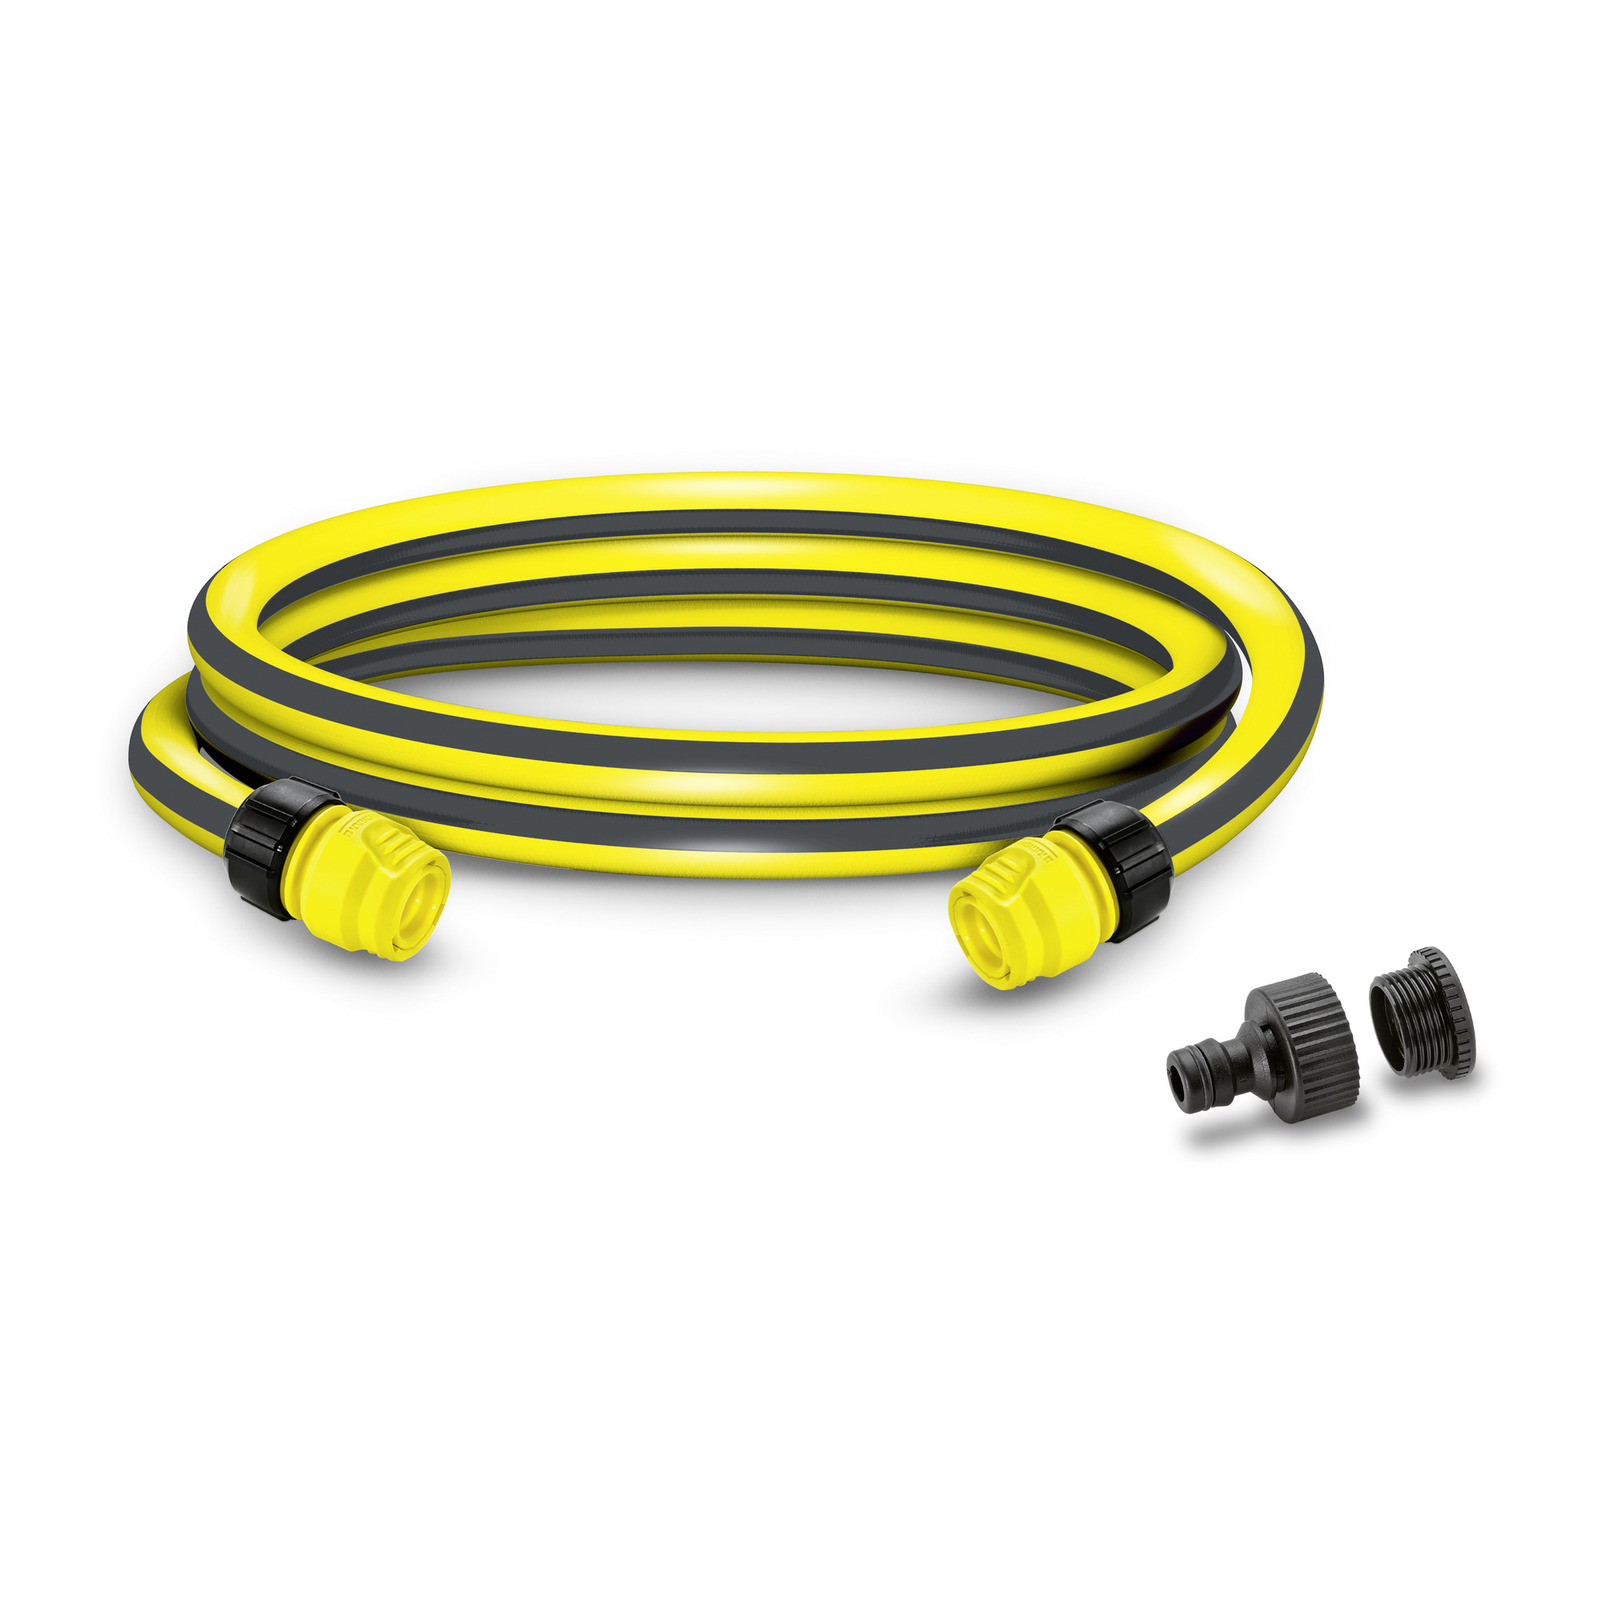 2x Plastic Hose Connector for Karcher K2 Water Cleaning Hose Replacement 